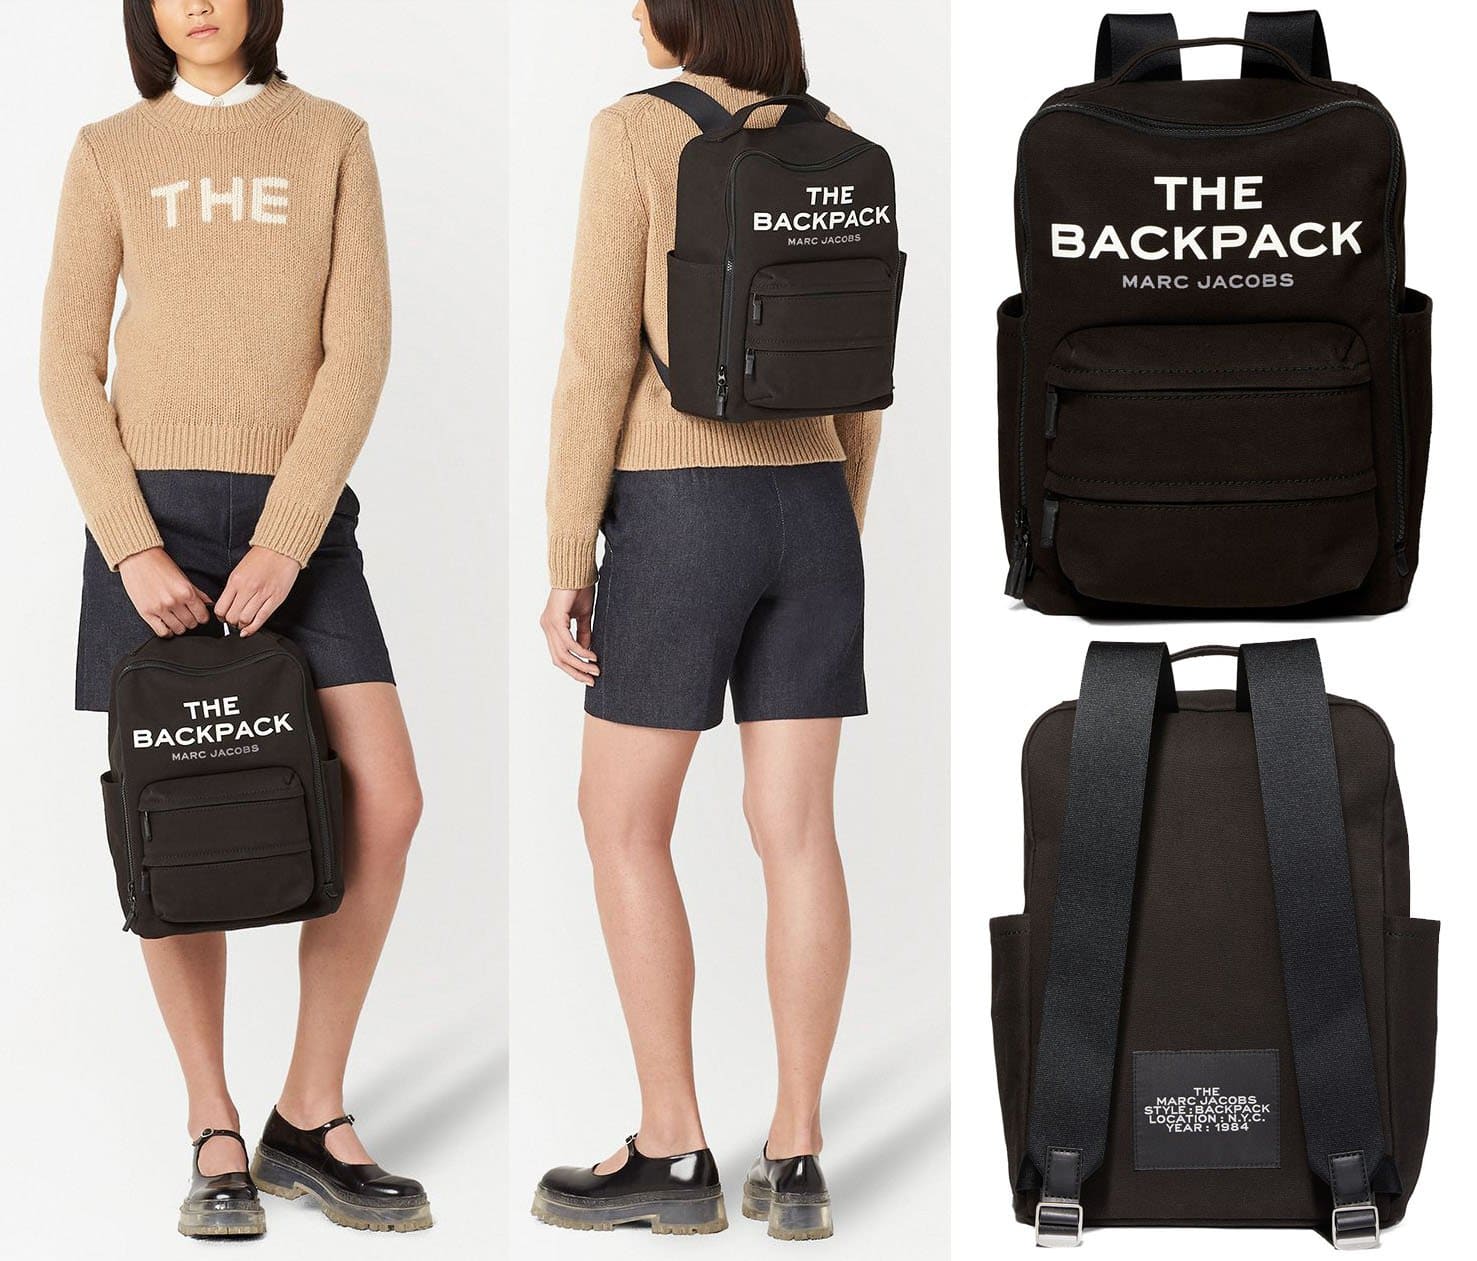 A lightweight cotton backpack, The Backpack by Marc Jacobs features a structured silhouette and a minimalistic design with a logo patch to the front